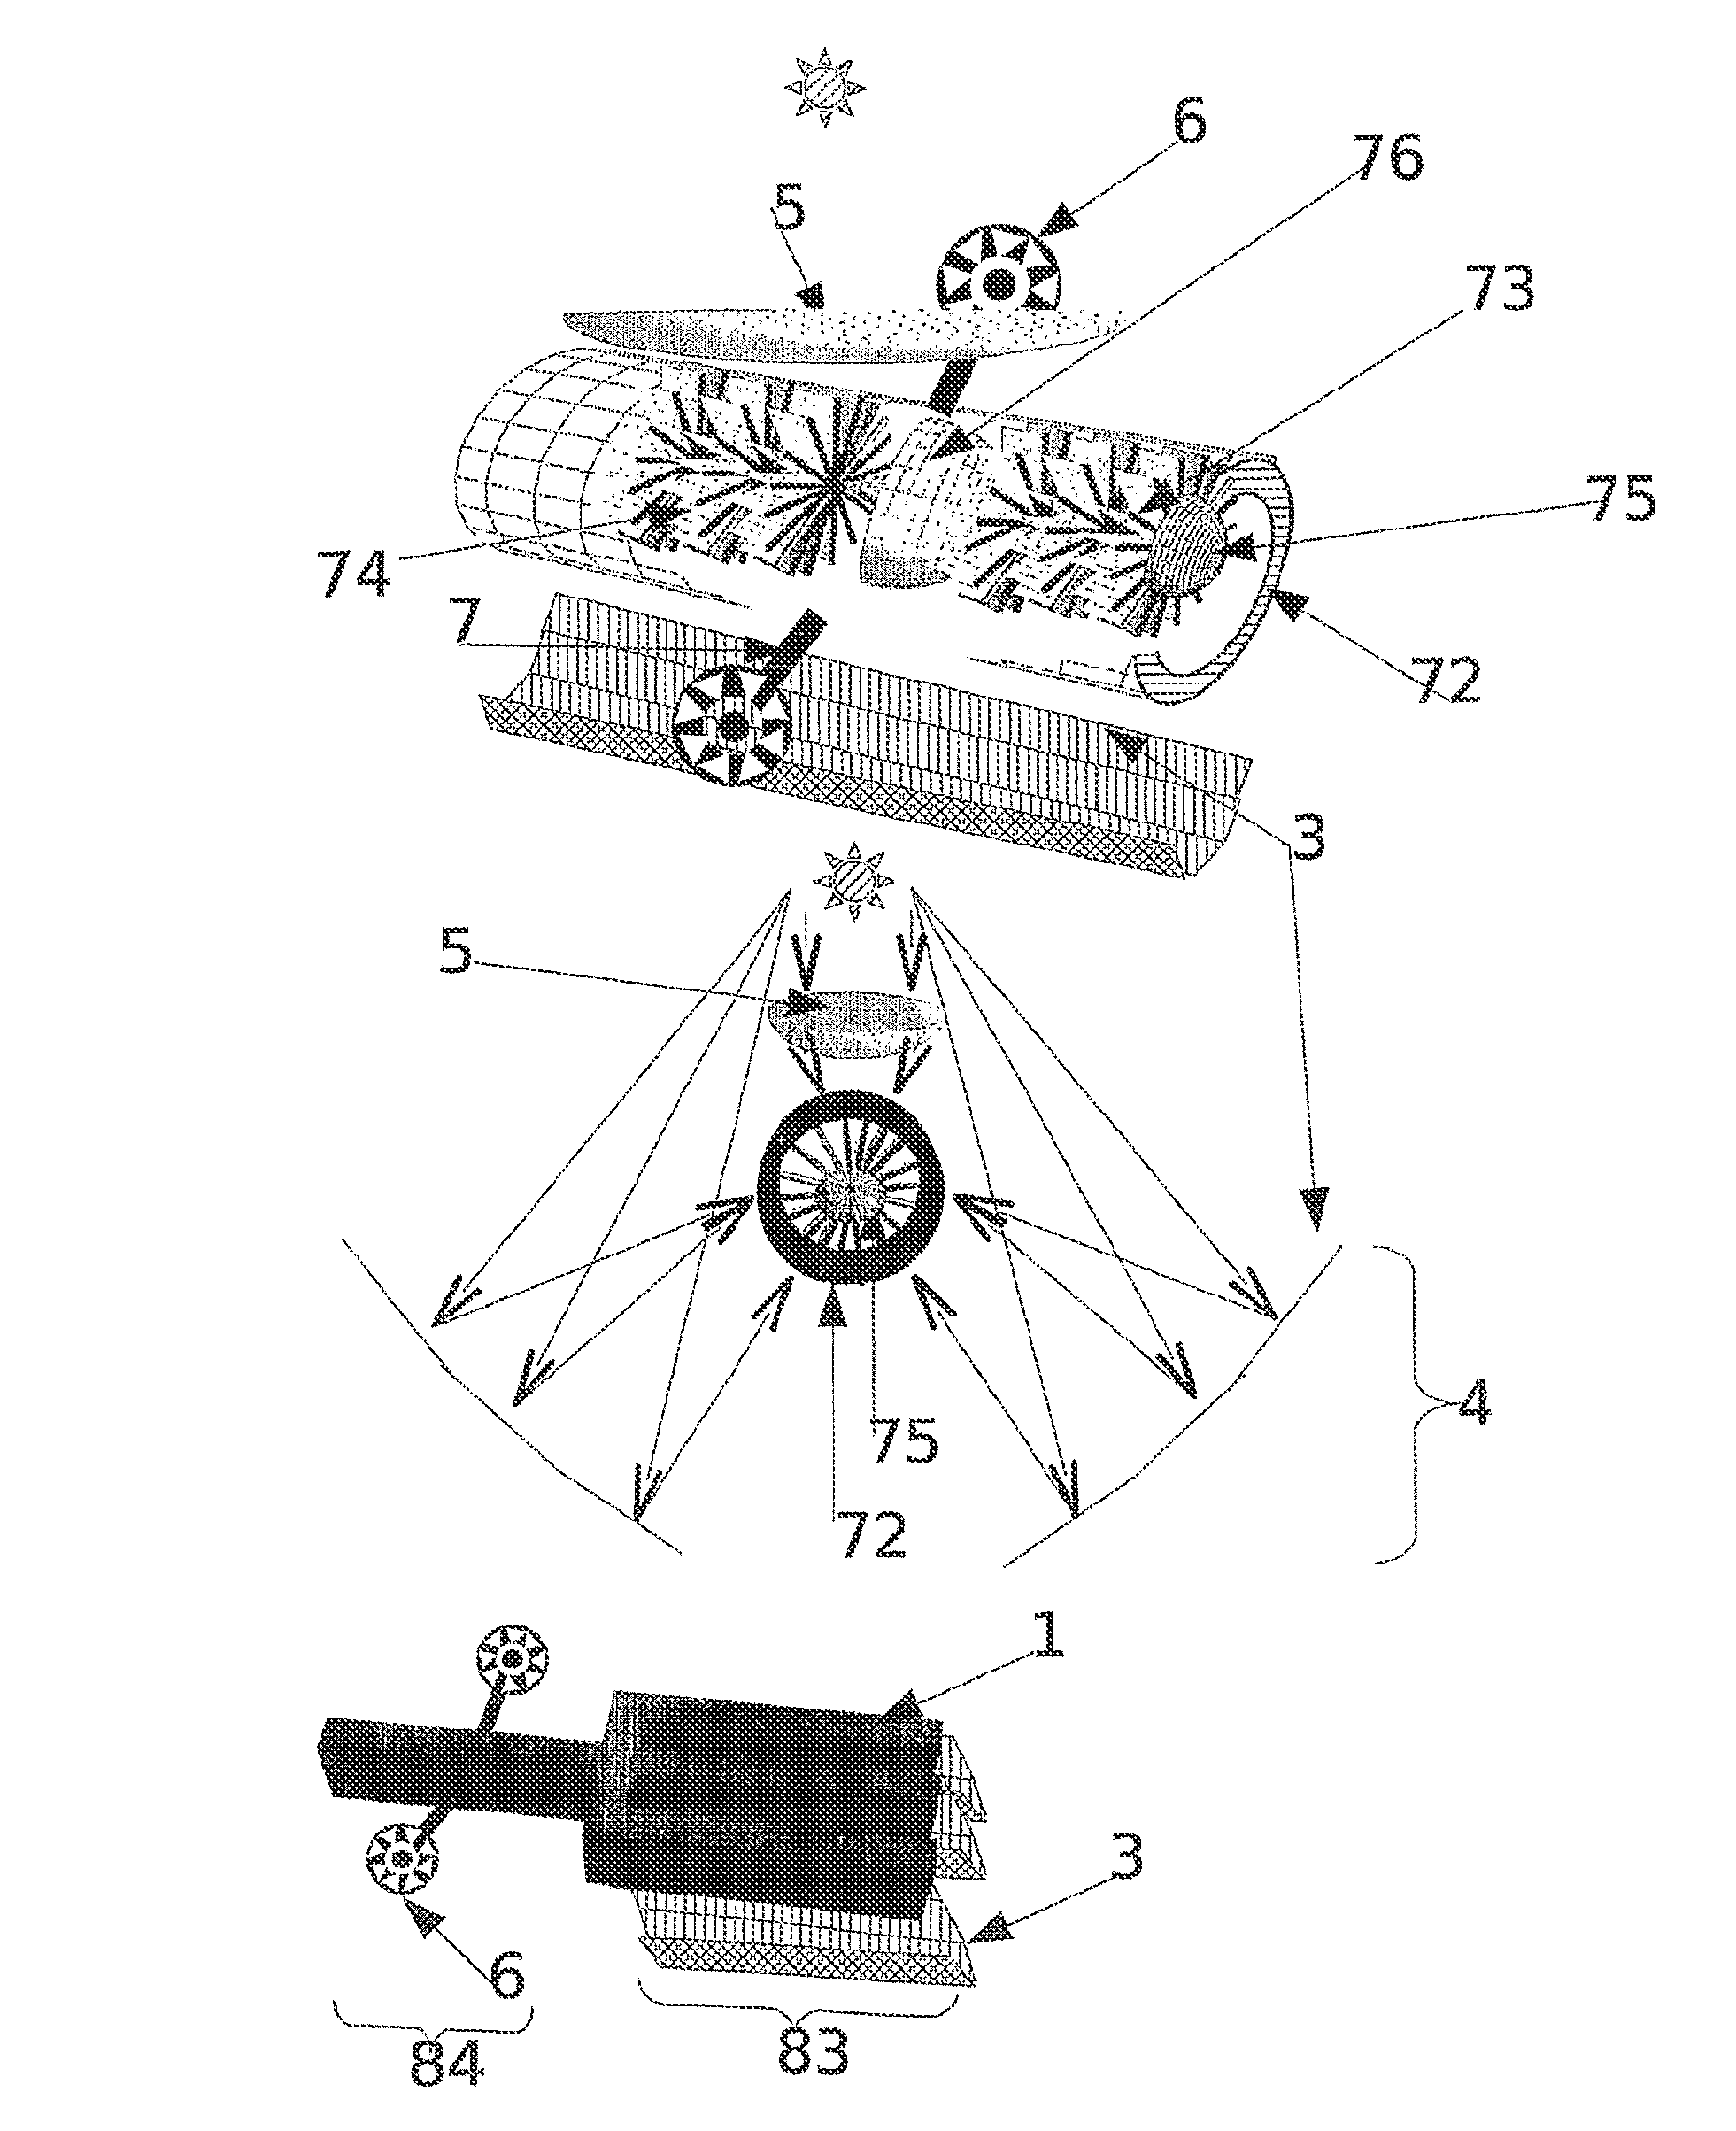 Method using solar energy, microwaves and plasmas to produce a liquid fuel and hydrogen from biomass or fossil coal